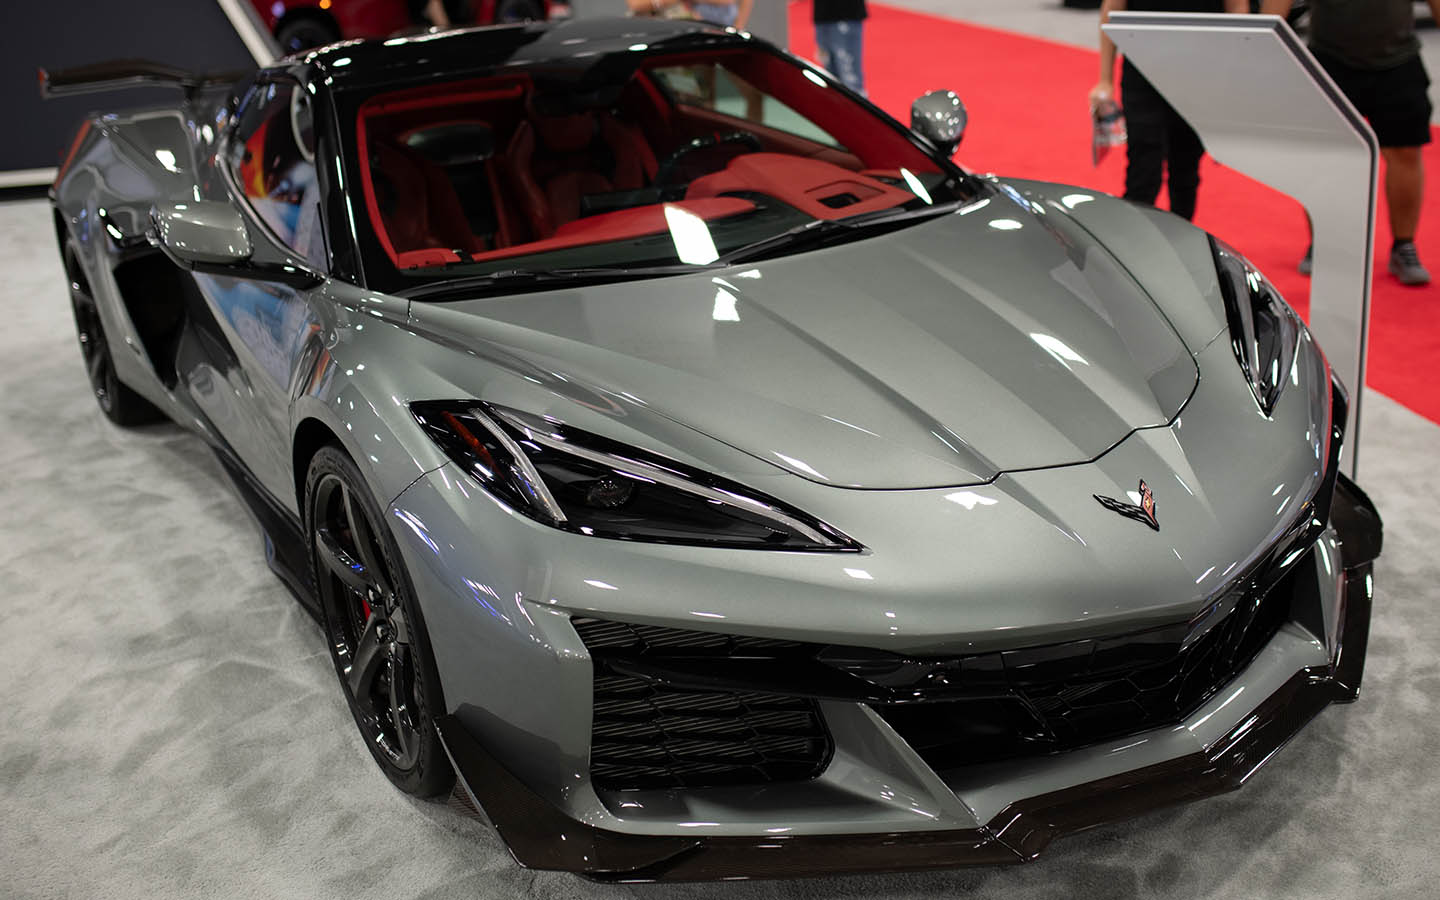 the zr1 is notable name in the chevrolet corvette history